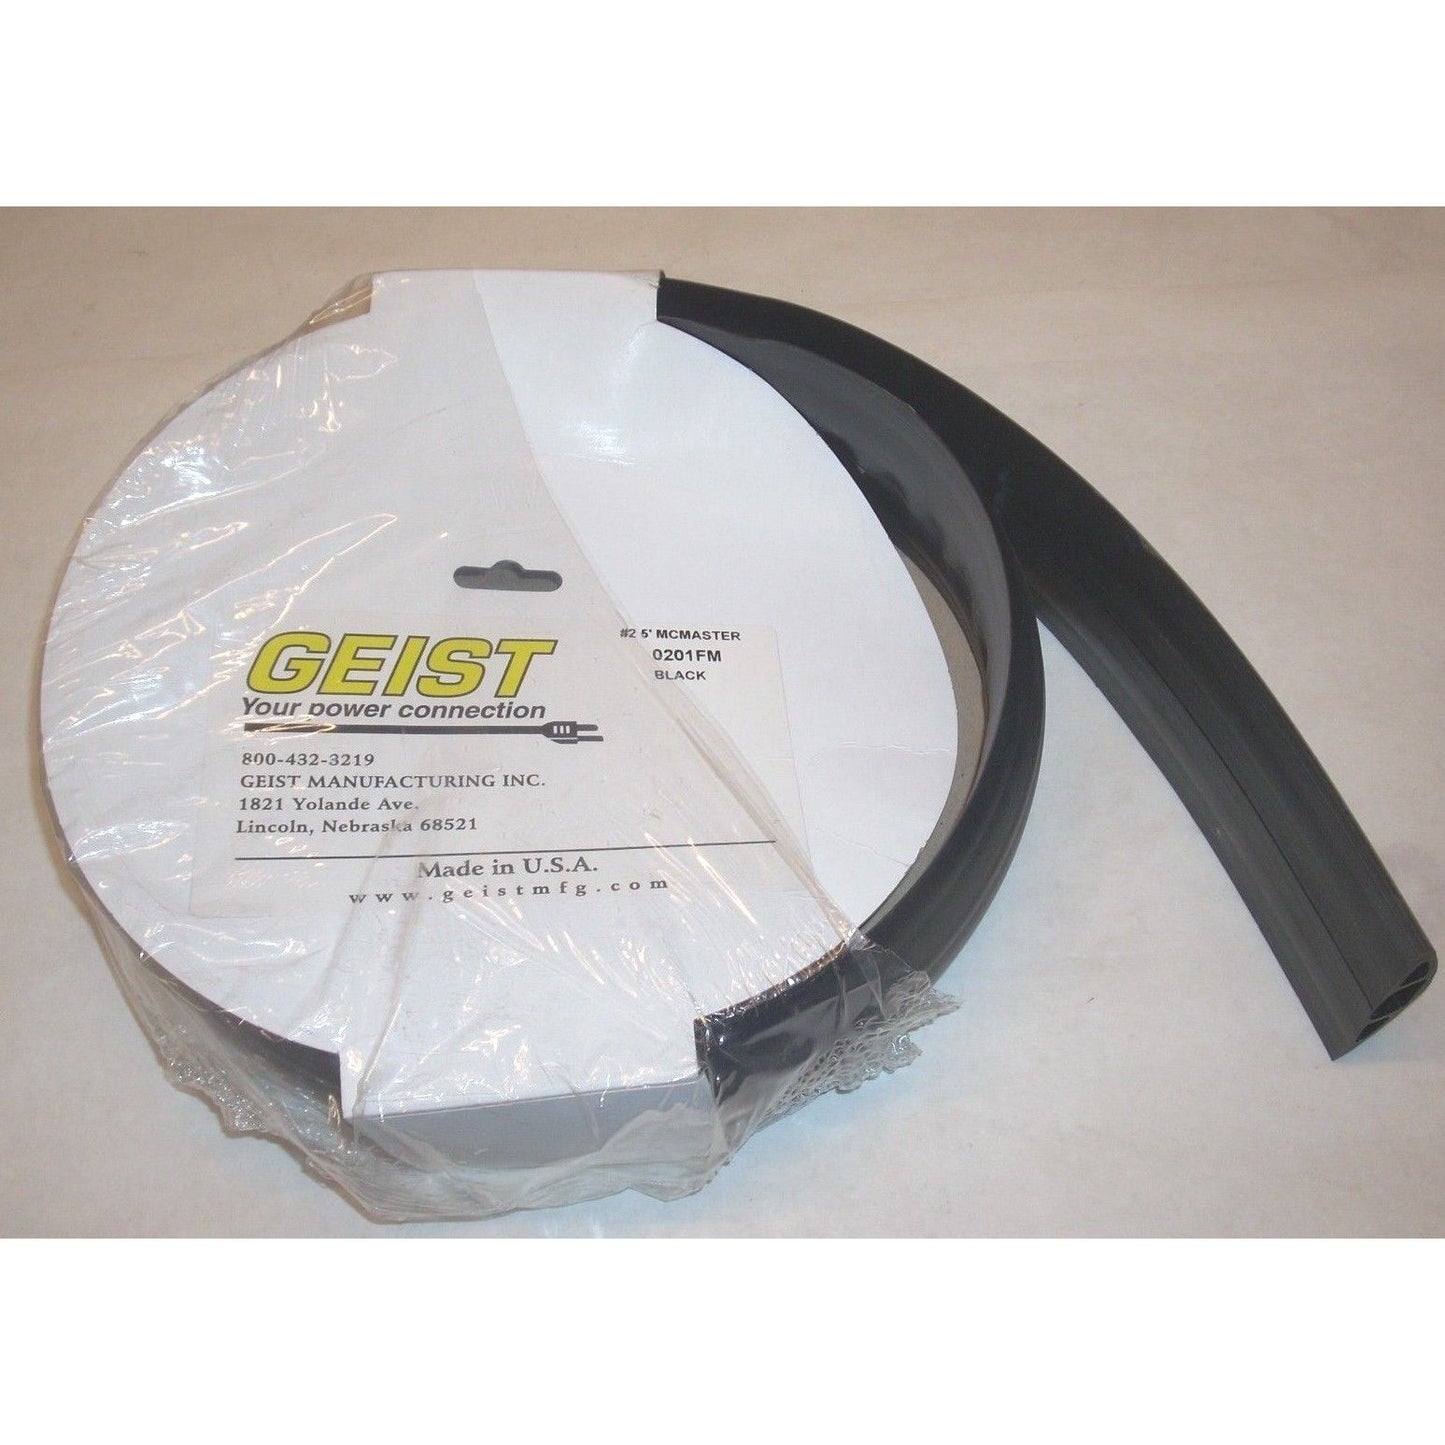 Geist 020FM Black Light Duty Cable Protector 5' McMaster USA Made